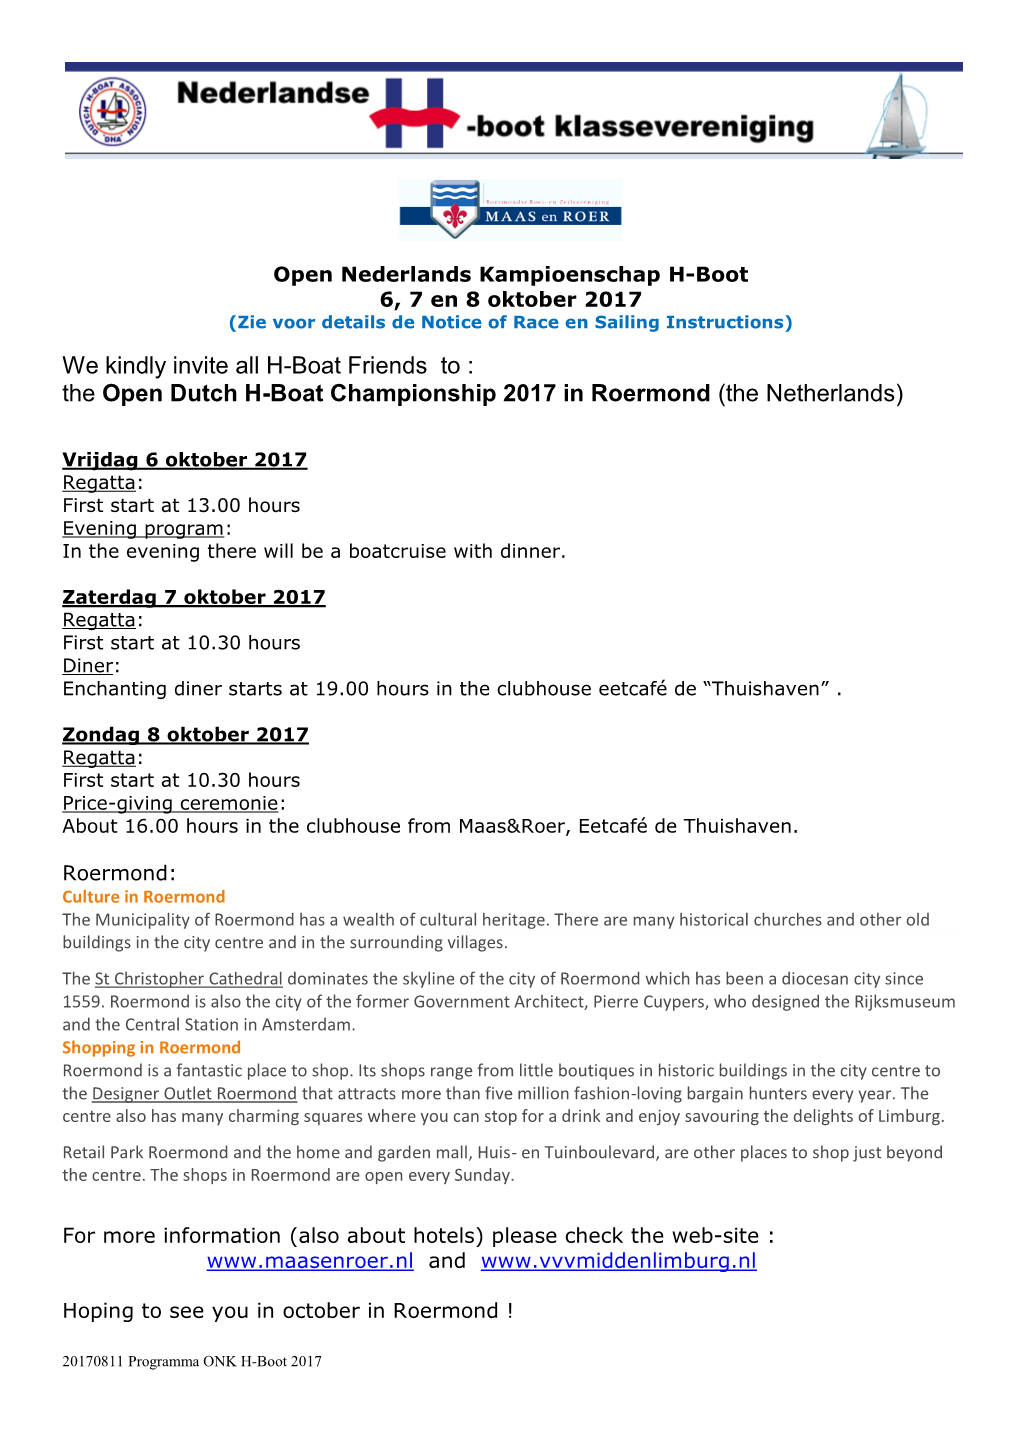 The Open Dutch H-Boat Championship 2017 in Roermond (The Netherlands)